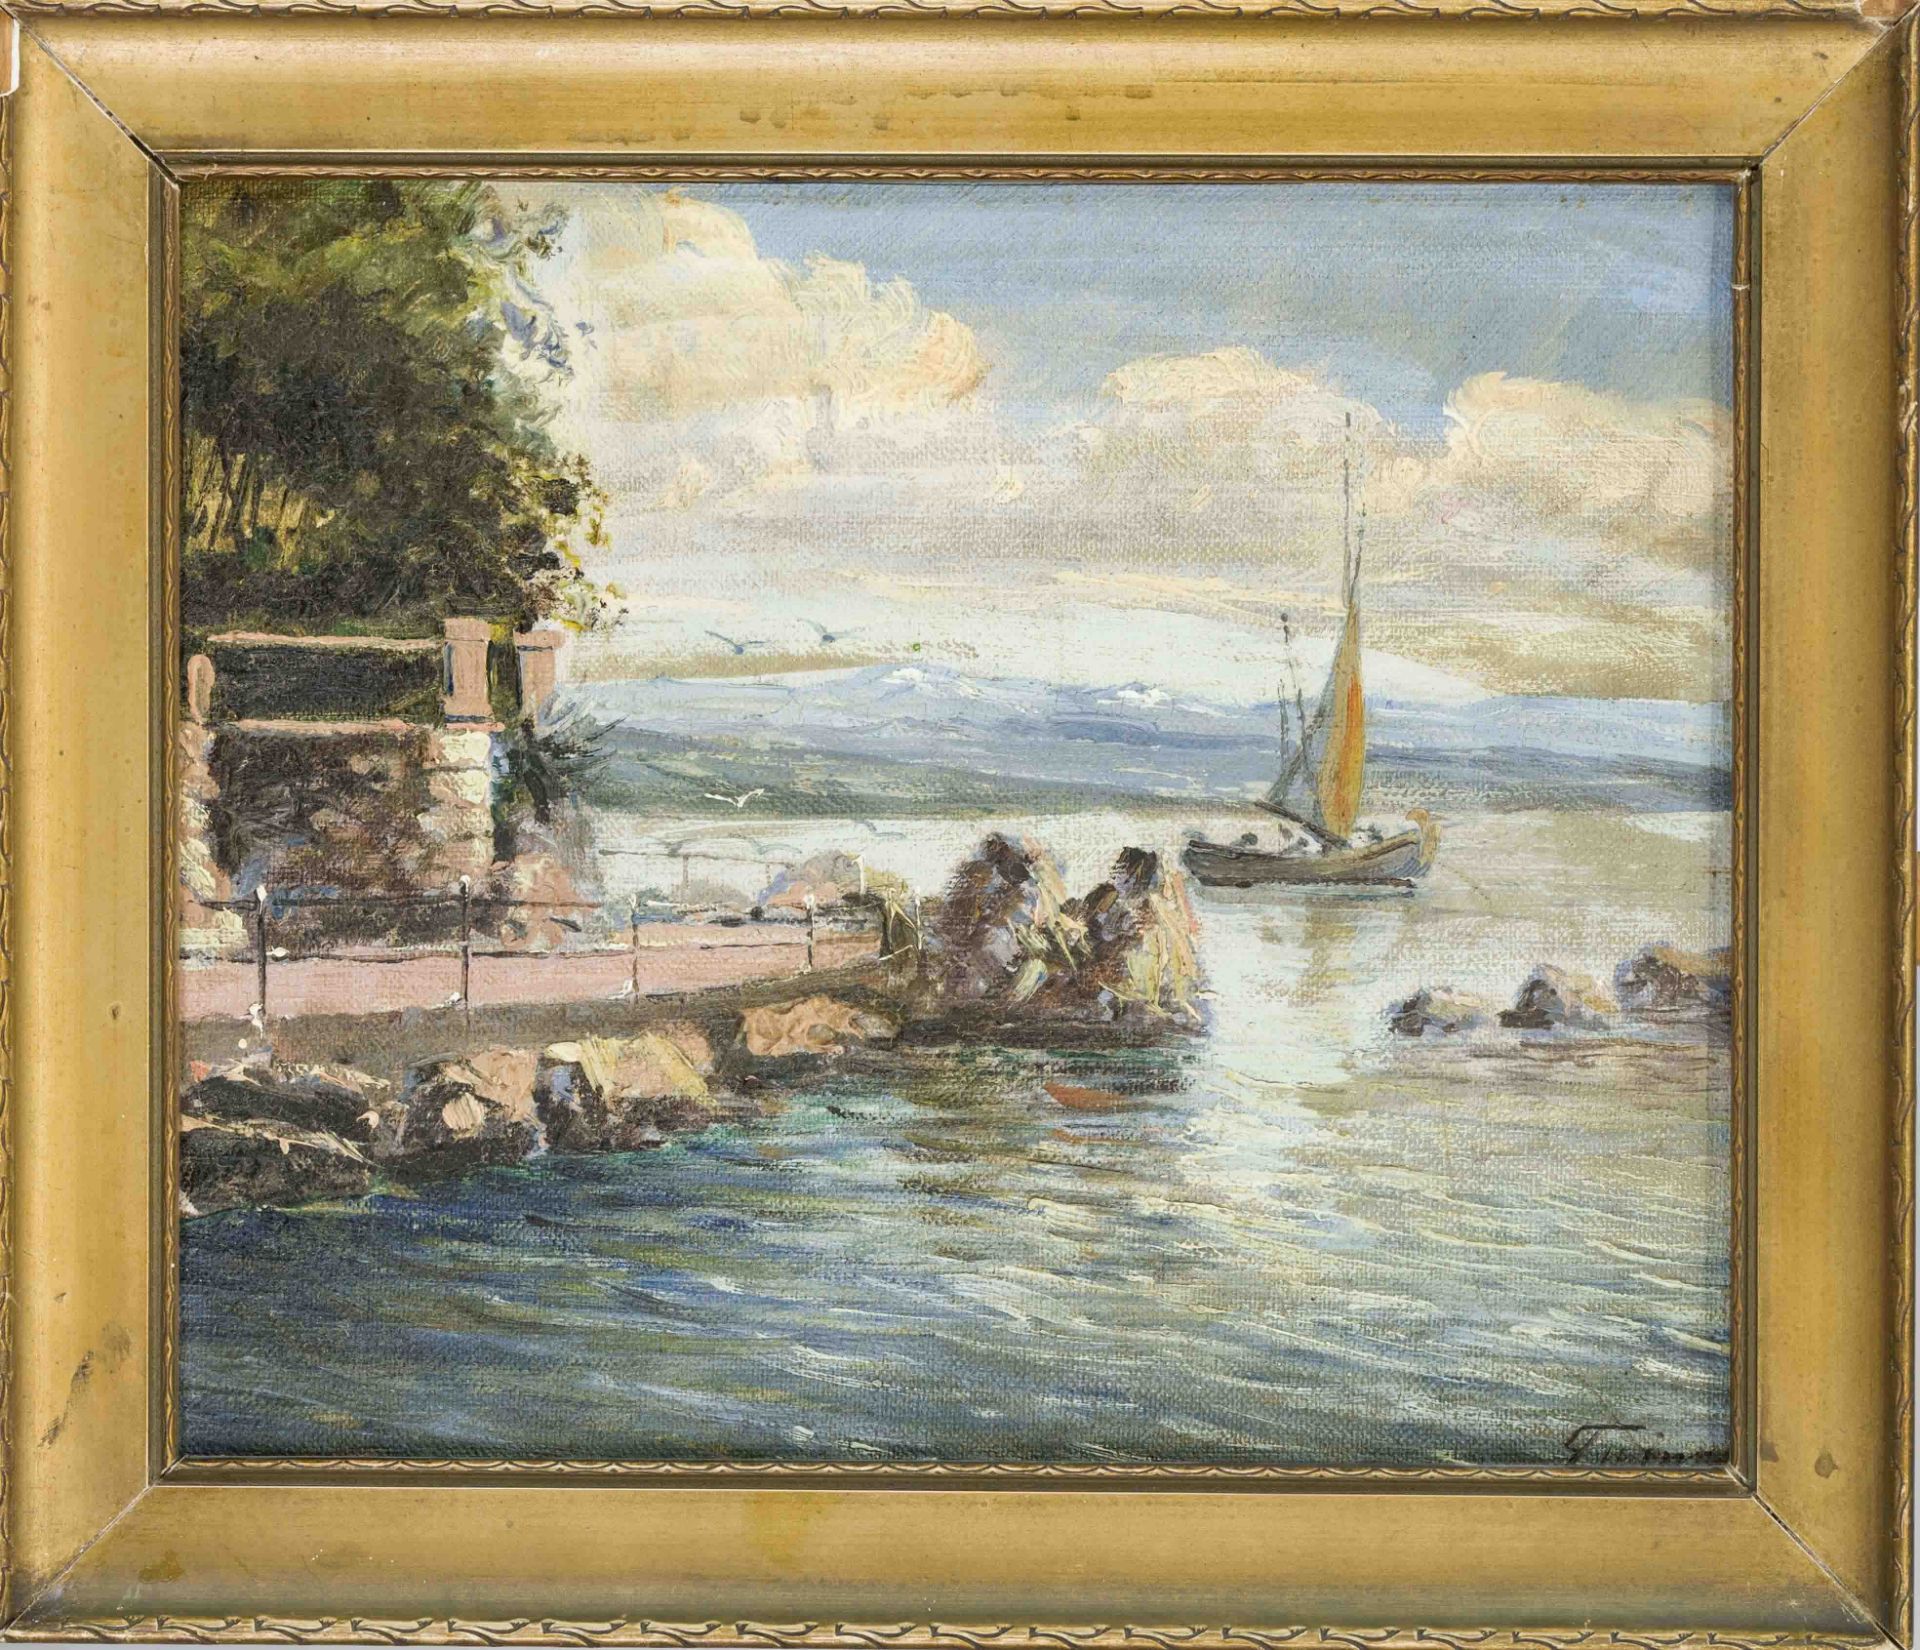 Unidentified artist late 19th century, lakeside scene in a southern landscape, oil on canvas over